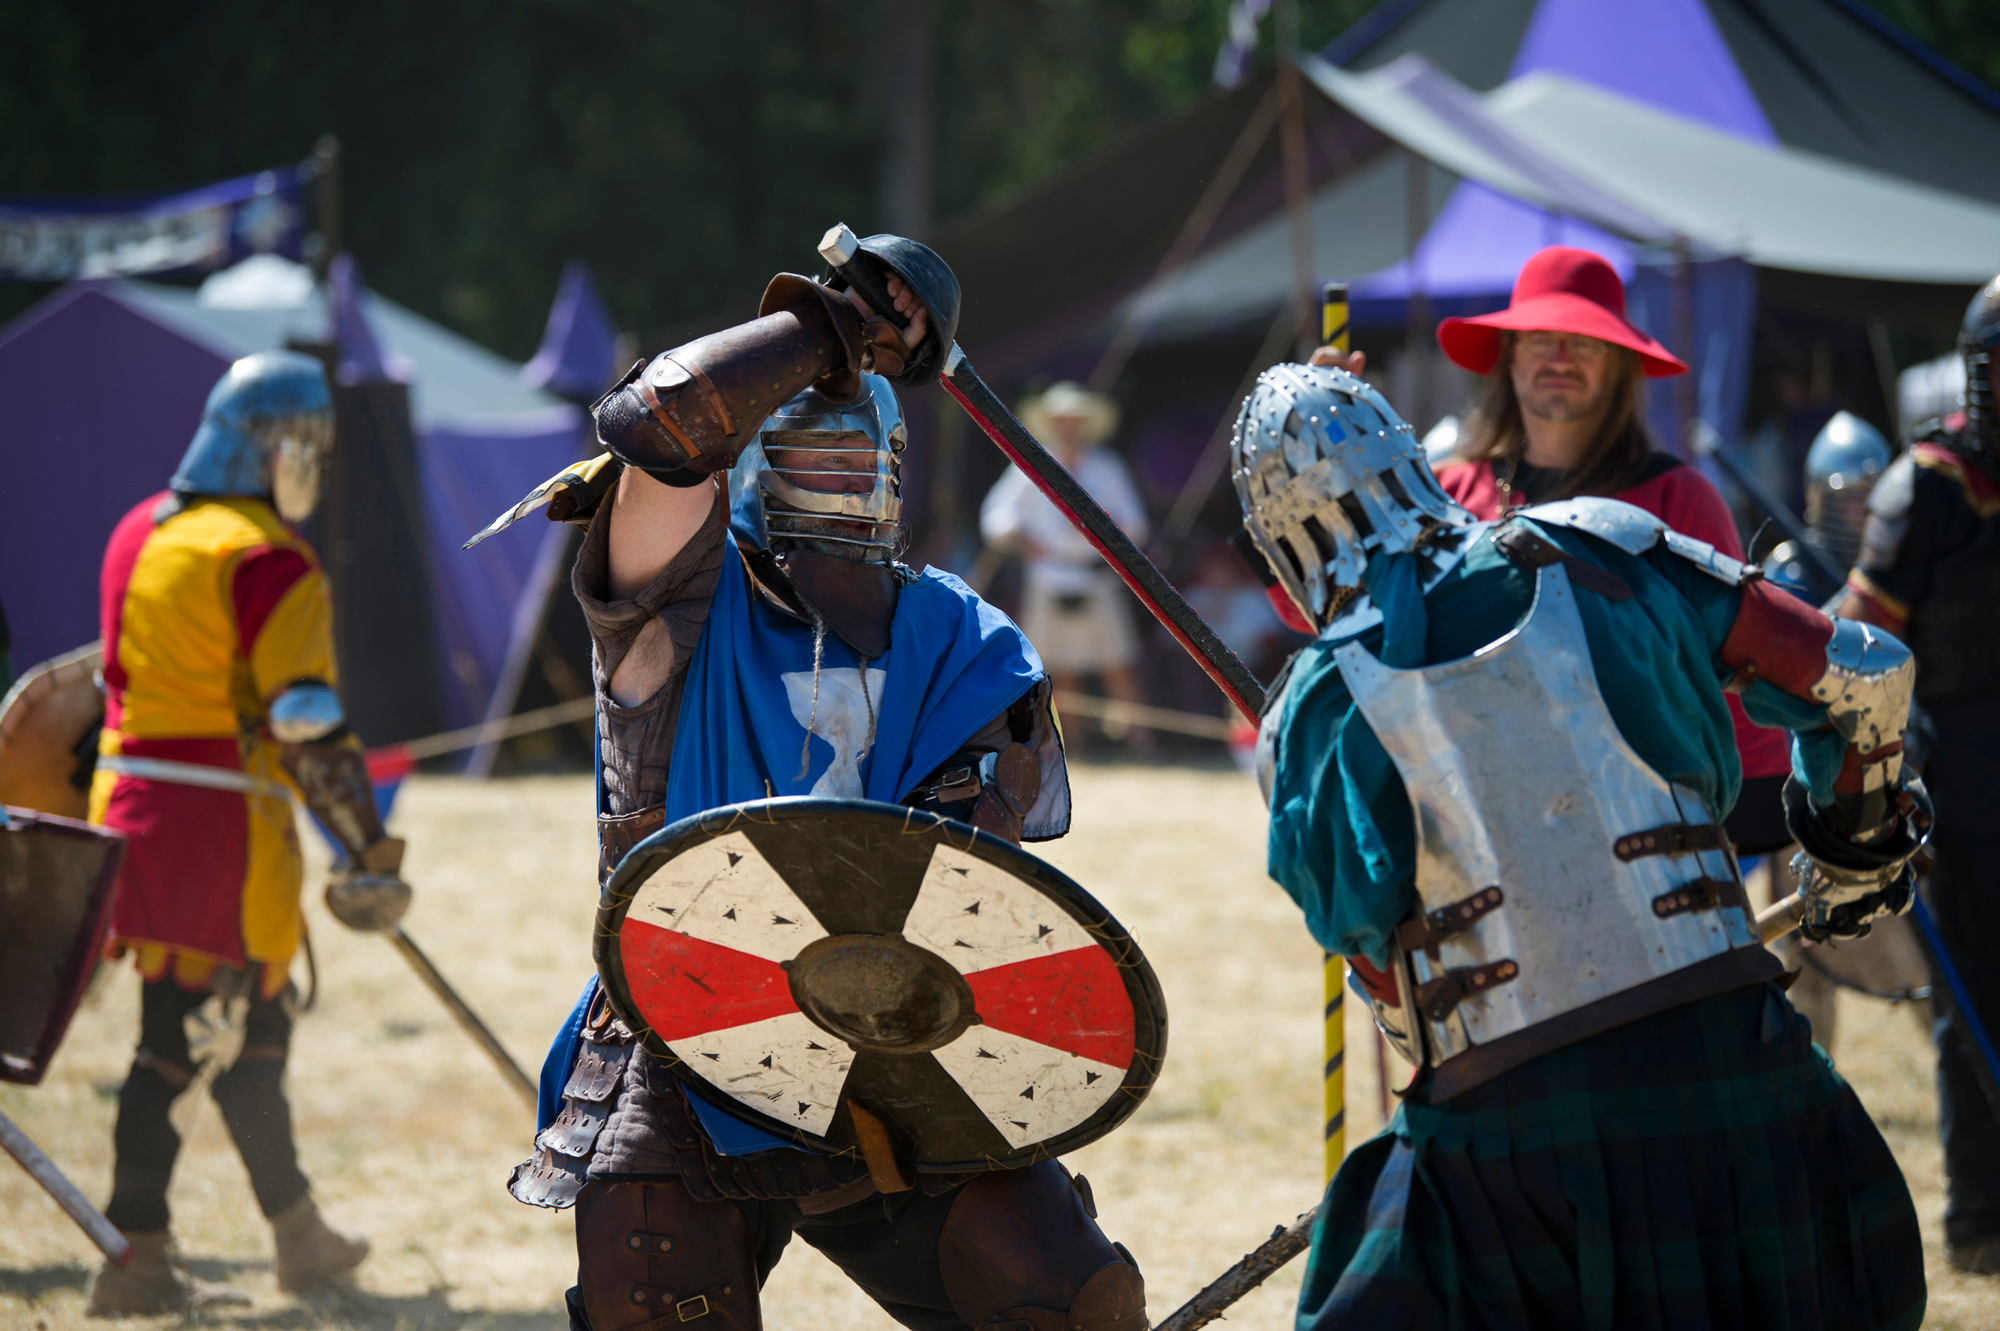 Swords & Chivalry in the Heat of the Battle « Special Projects